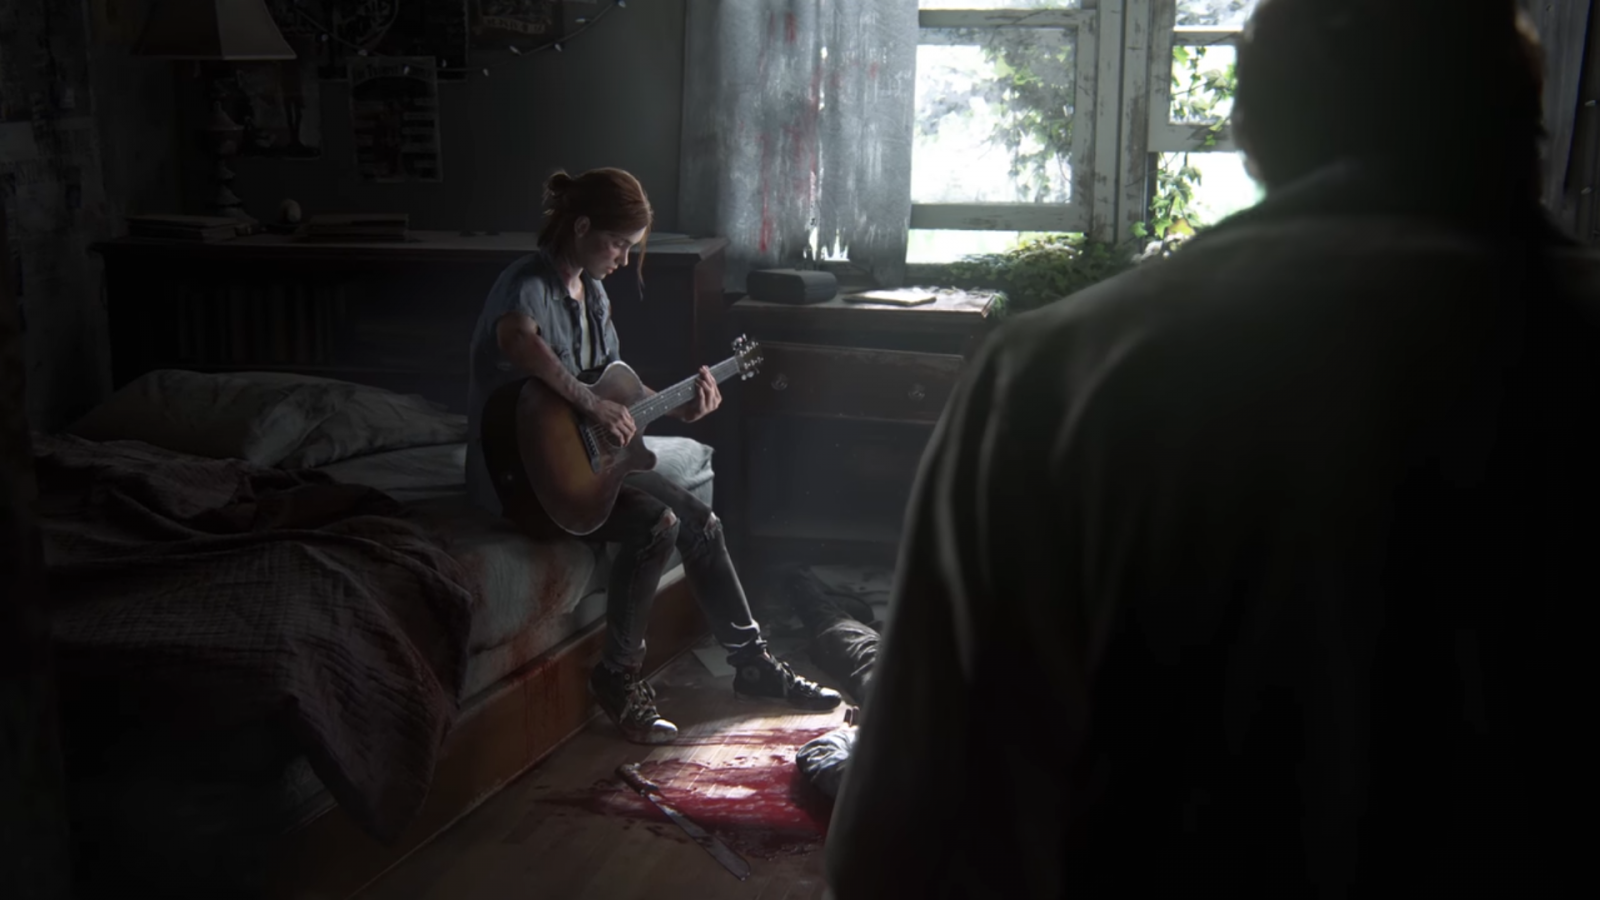 the last of us part 2 spoiler review